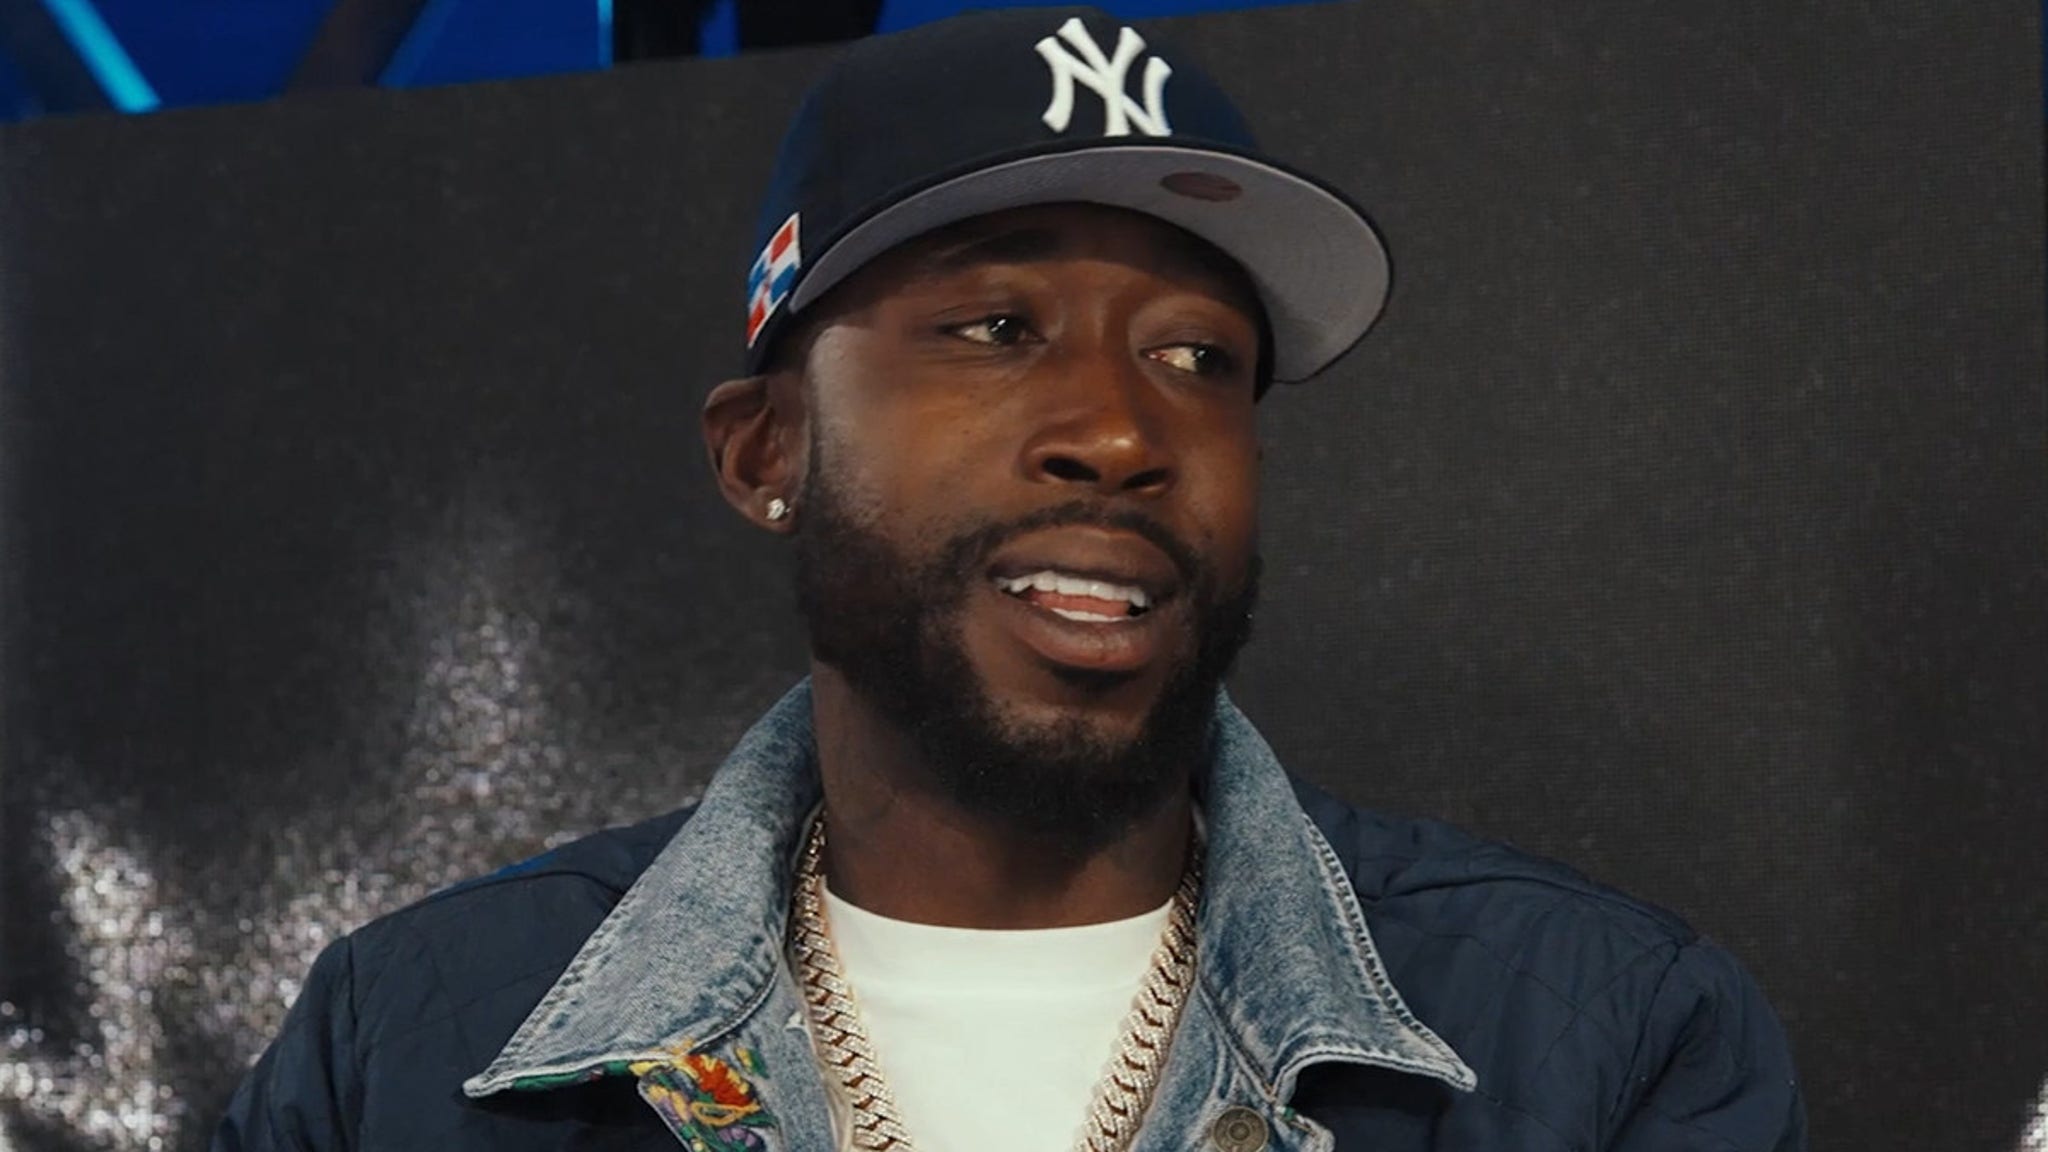 Freddie Gibbs says he loves Akademiks and Gunna, wants beef to stay online